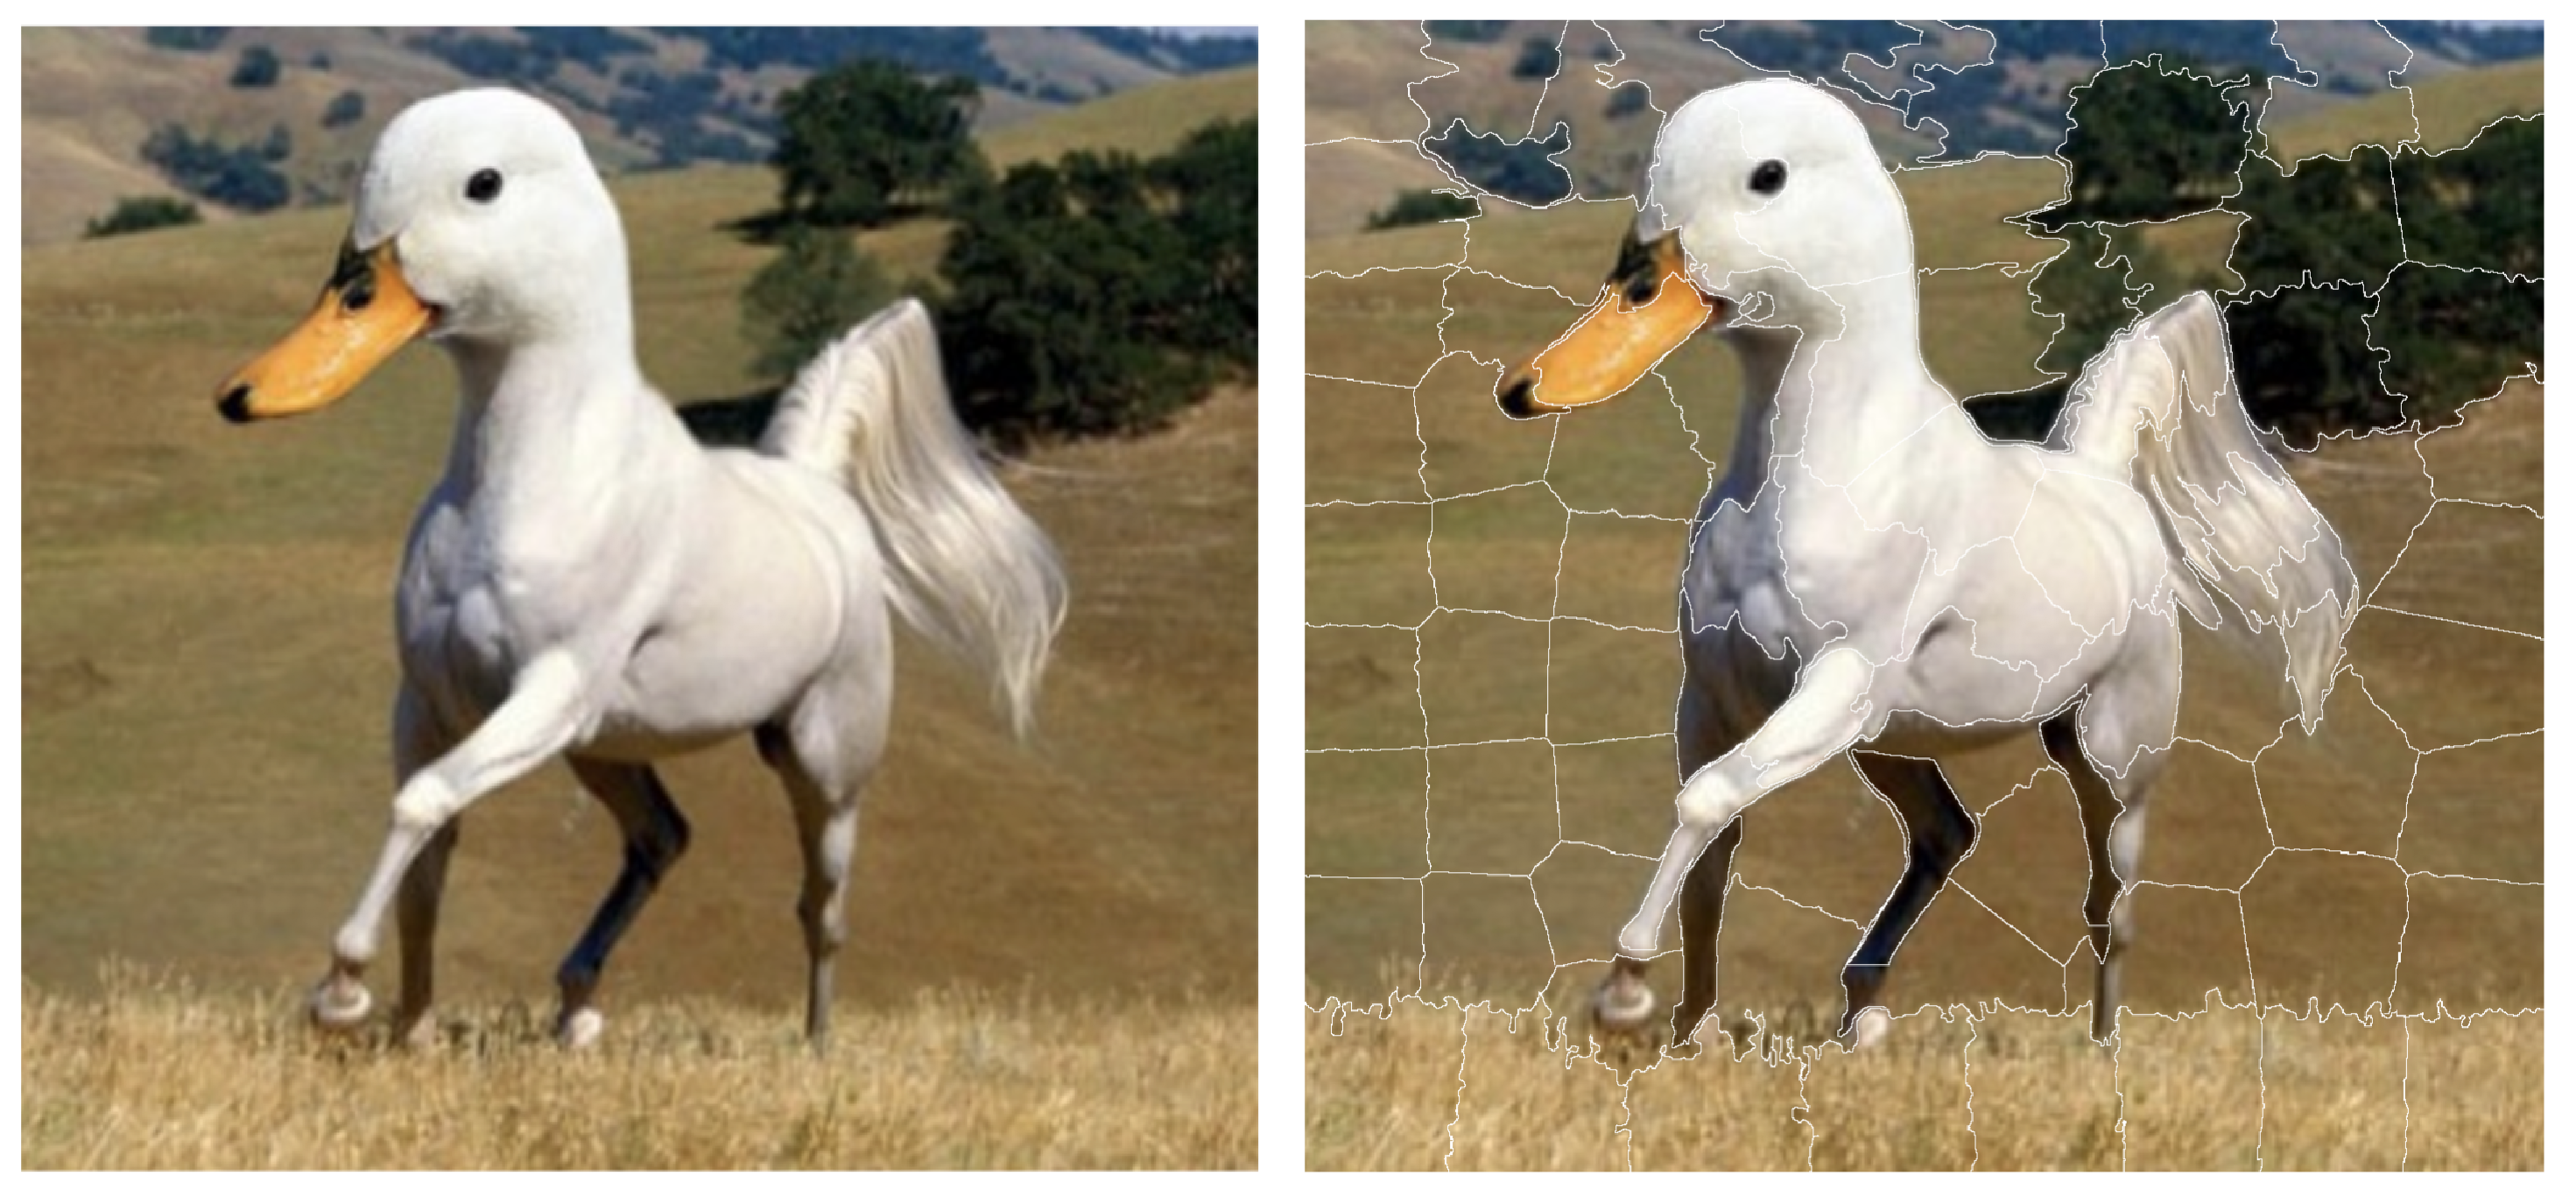 The left-hand-side panel shows an ambiguous picture, half-horse and half-duck (source Twitter). The right-hand-side panel shows 100 superpixels identified for this figure.